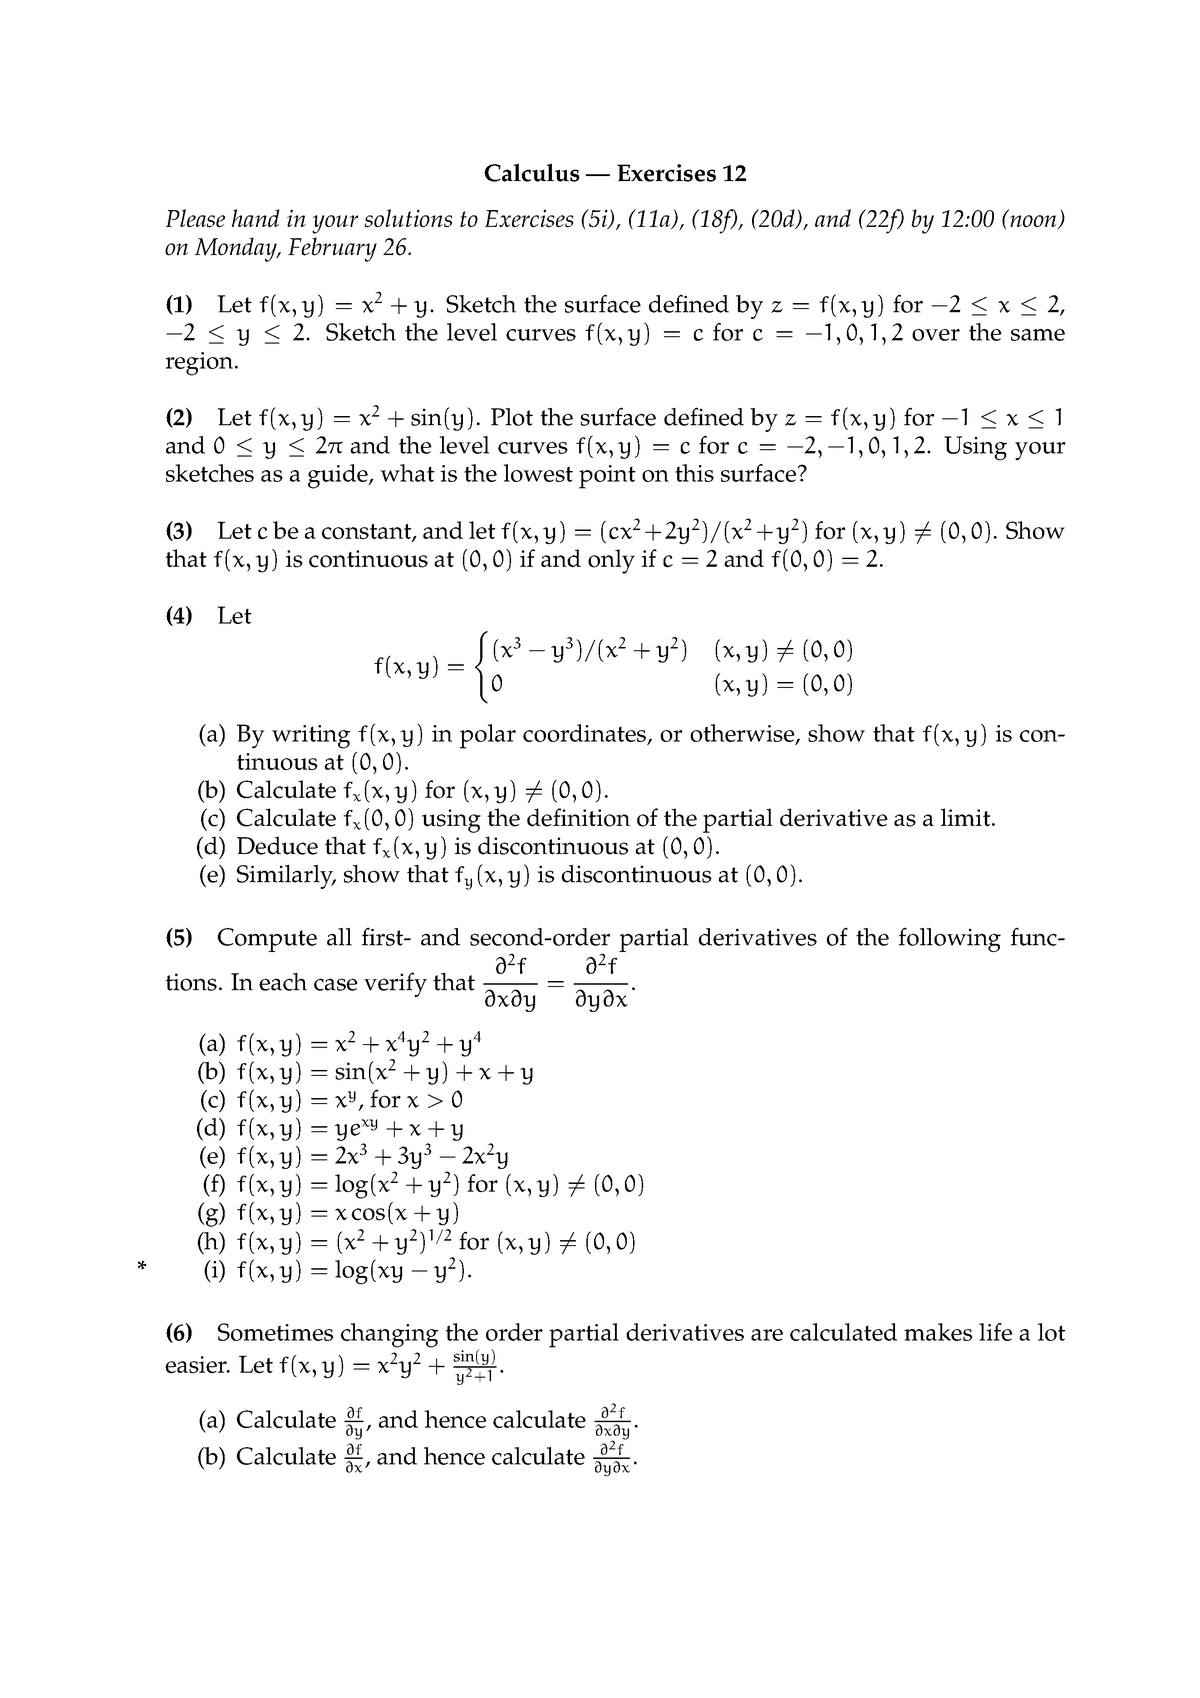 Question Sheet For Assessment 12 Of The Calculus Module Calculus Exercises 12 Please Hand In Studocu